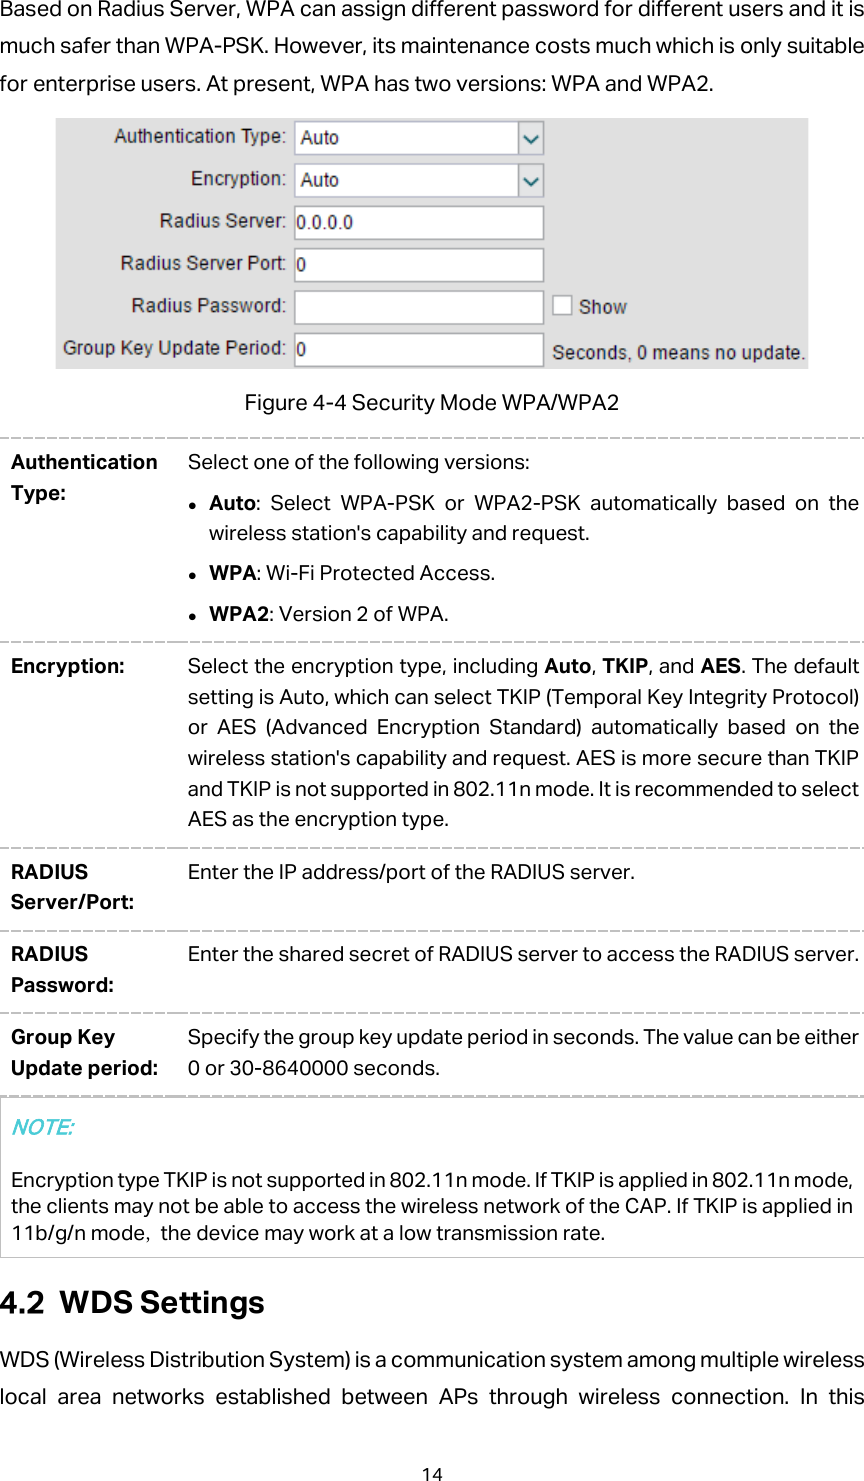 Based on Radius Server, WPA can assign different password for different users and it is much safer than WPA-PSK. However, its maintenance costs much which is only suitable for enterprise users. At present, WPA has two versions: WPA and WPA2.    Figure 4-4 Security Mode WPA/WPA2 Authentication Type: Select one of the following versions:    Auto: Select WPA-PSK or WPA2-PSK automatically based on the wireless station&apos;s capability and request.  WPA: Wi-Fi Protected Access.  WPA2: Version 2 of WPA. Encryption: Select the encryption type, including Auto, TKIP, and AES. The default setting is Auto, which can select TKIP (Temporal Key Integrity Protocol) or AES (Advanced Encryption Standard) automatically based on the wireless station&apos;s capability and request. AES is more secure than TKIP and TKIP is not supported in 802.11n mode. It is recommended to select AES as the encryption type. RADIUS Server/Port: Enter the IP address/port of the RADIUS server. RADIUS Password: Enter the shared secret of RADIUS server to access the RADIUS server. Group Key Update period: Specify the group key update period in seconds. The value can be either 0 or 30-8640000 seconds. NOTE: Encryption type TKIP is not supported in 802.11n mode. If TKIP is applied in 802.11n mode, the clients may not be able to access the wireless network of the CAP. If TKIP is applied in 11b/g/n mode, the device may work at a low transmission rate.  WDS Settings WDS (Wireless Distribution System) is a communication system among multiple wireless local area networks established between APs through wireless connection. In this 14 